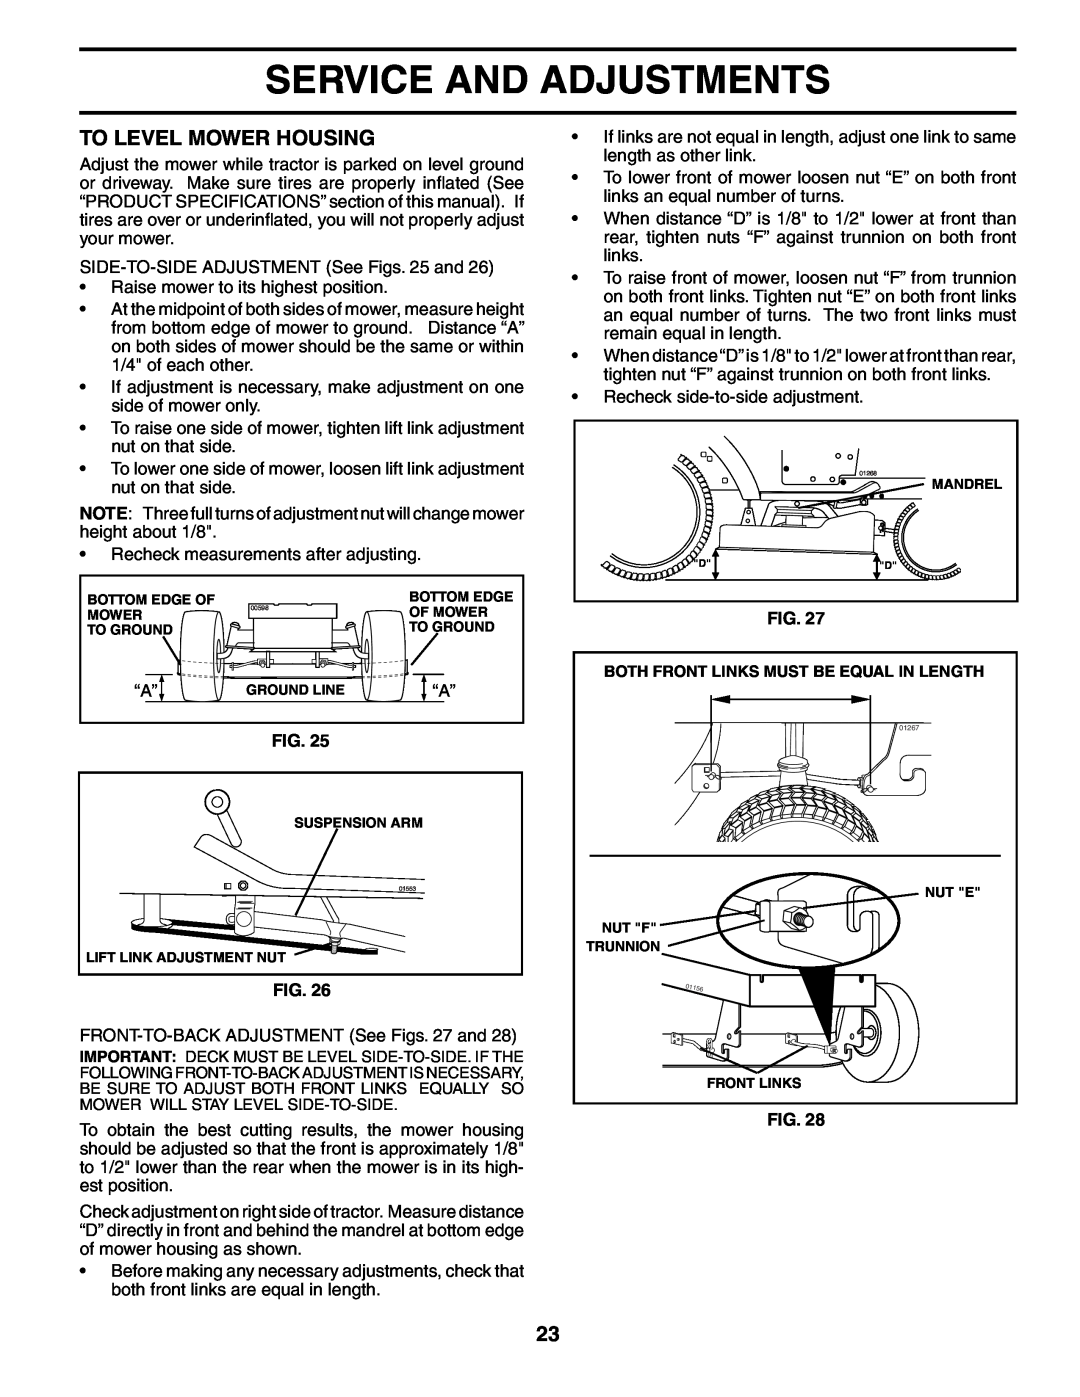 Husqvarna CTH180 XP 02764 owner manual To Level Mower Housing, Service And Adjustments 